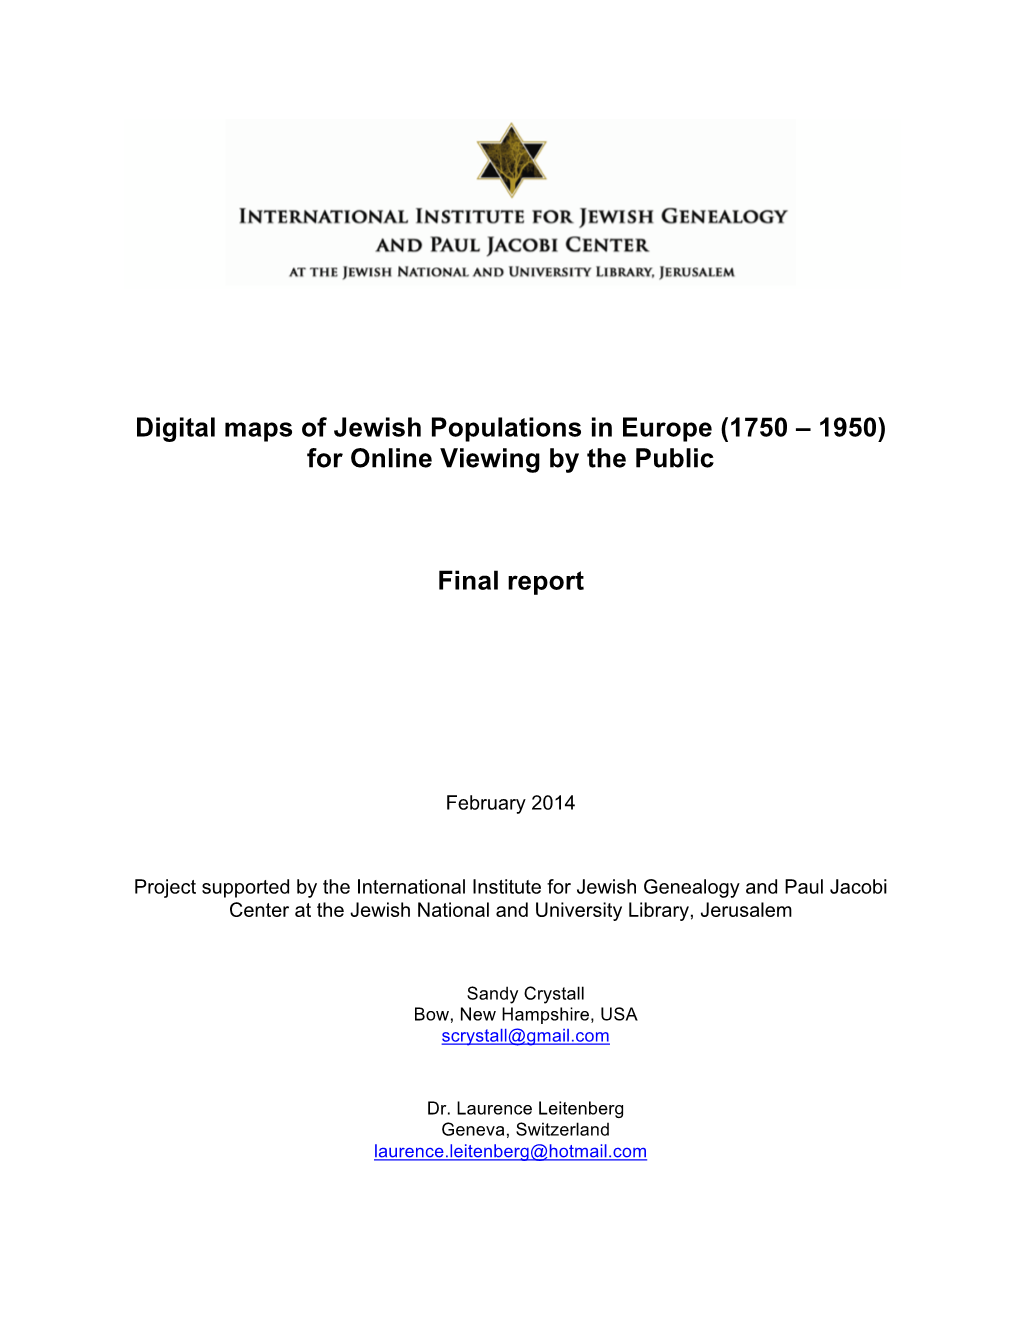 Digital Maps of Jewish Populations in Europe (1750 – 1950) for Online Viewing by the Public